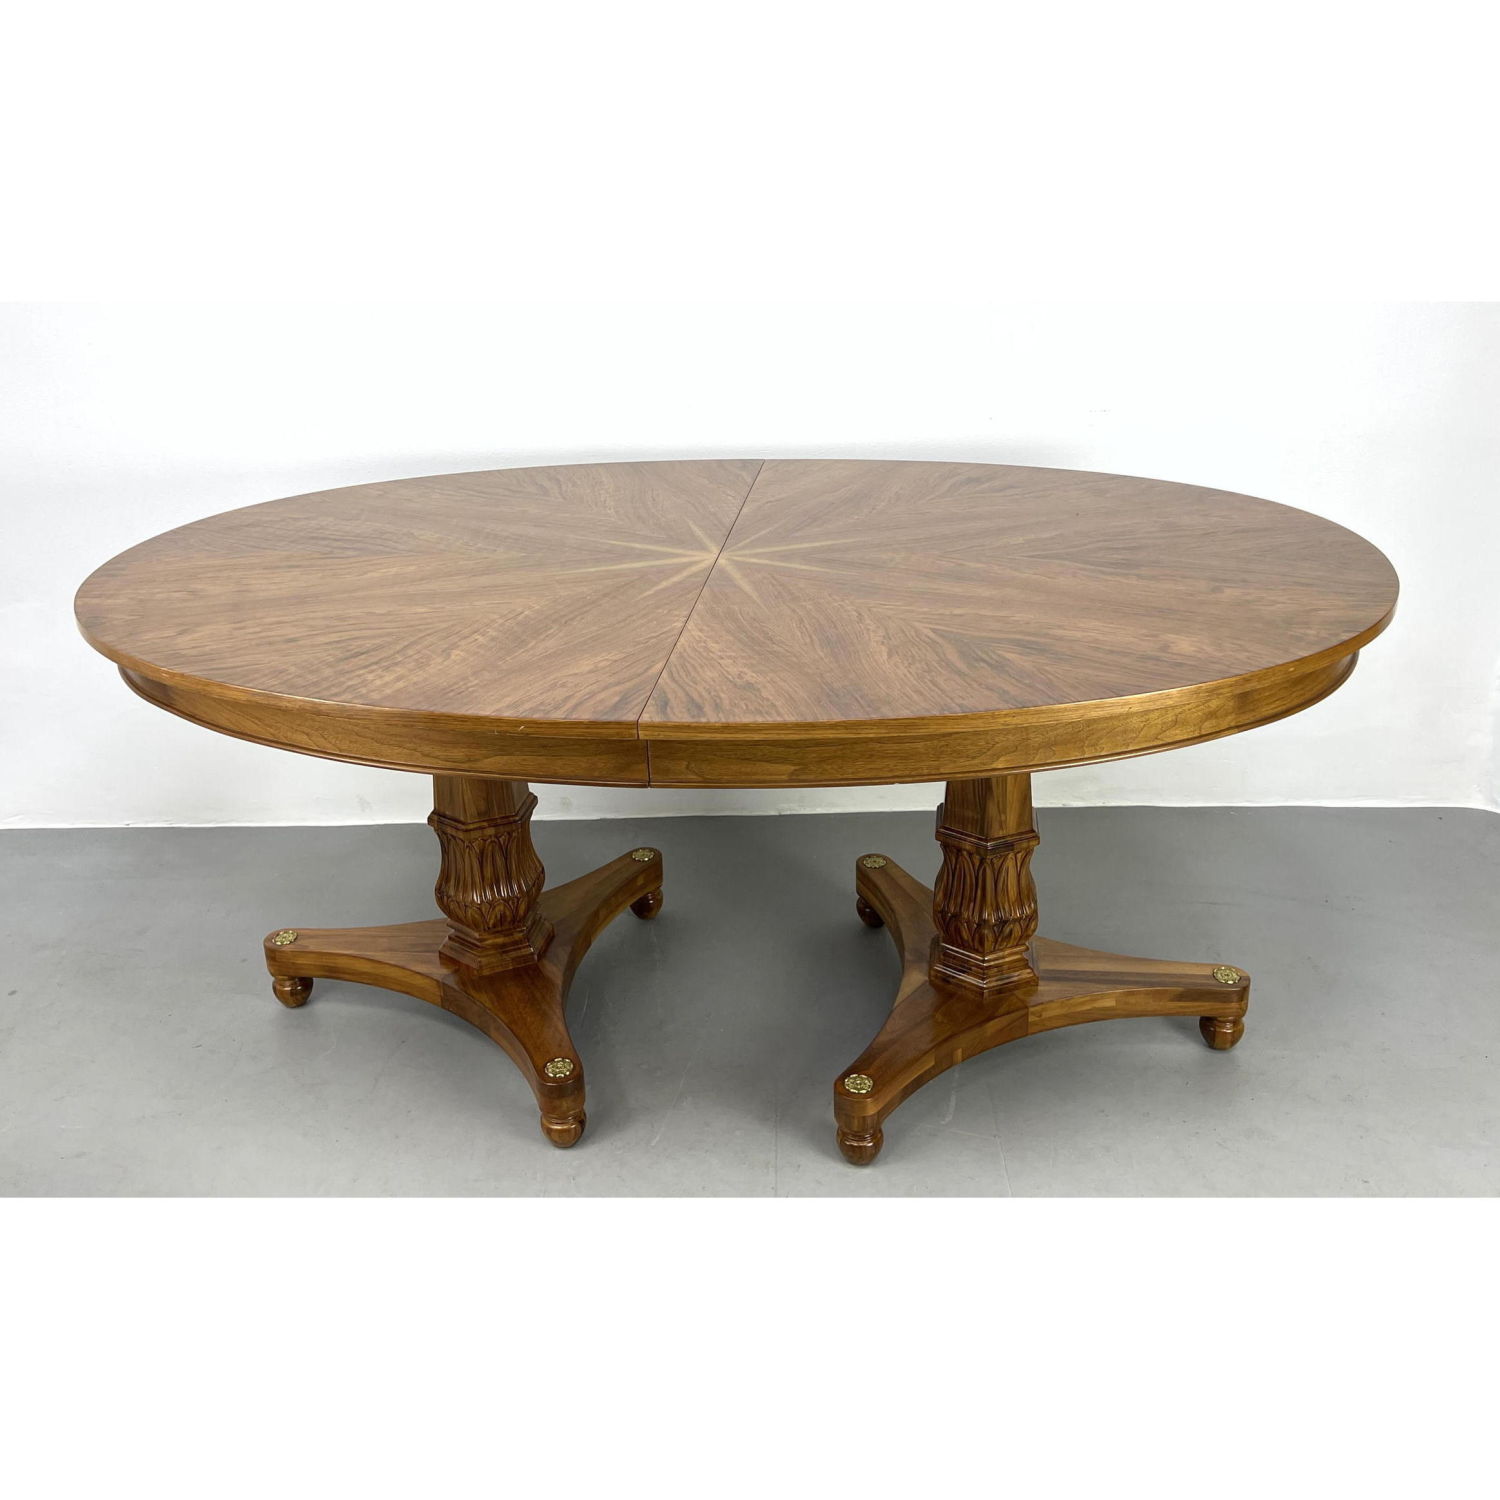 Double Pedestal Dining Table. Star design